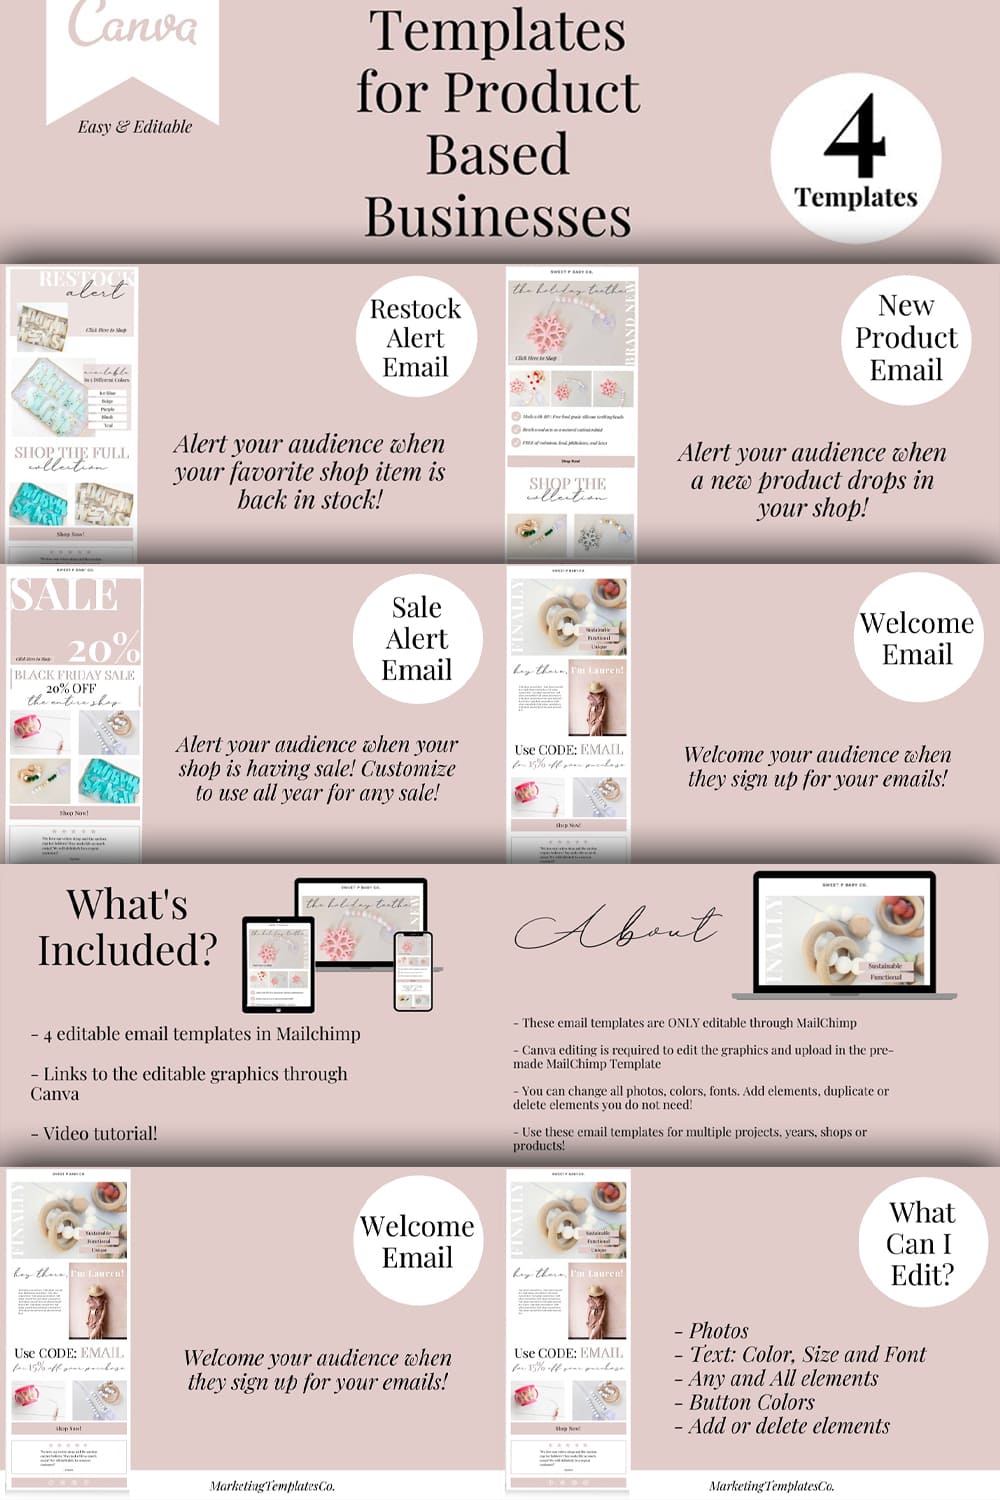 Email Templates For Mailchimp - Pinterest.